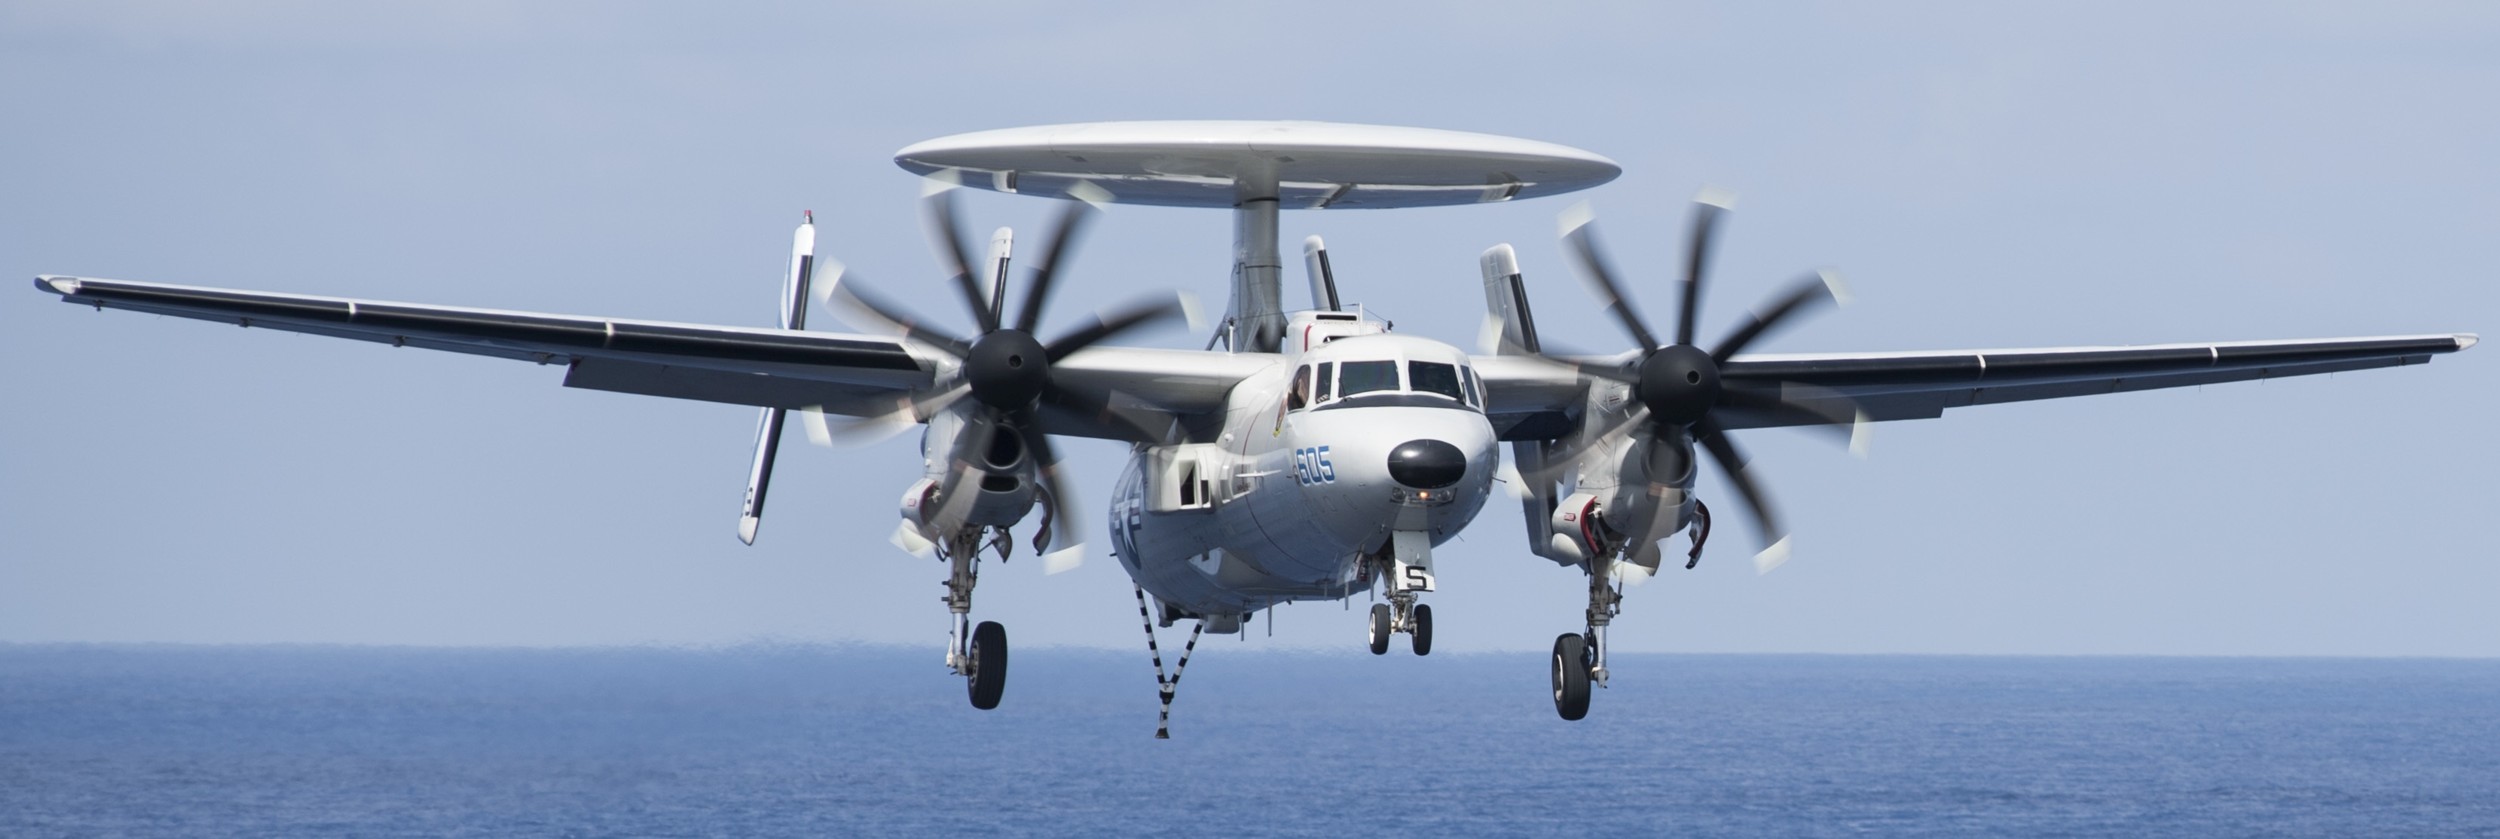 vaw-121 bluetails carrier airborne early warning squadron us navy e-2d advanced hawkeye cvw-7 uss abraham lincoln cvn-72 47